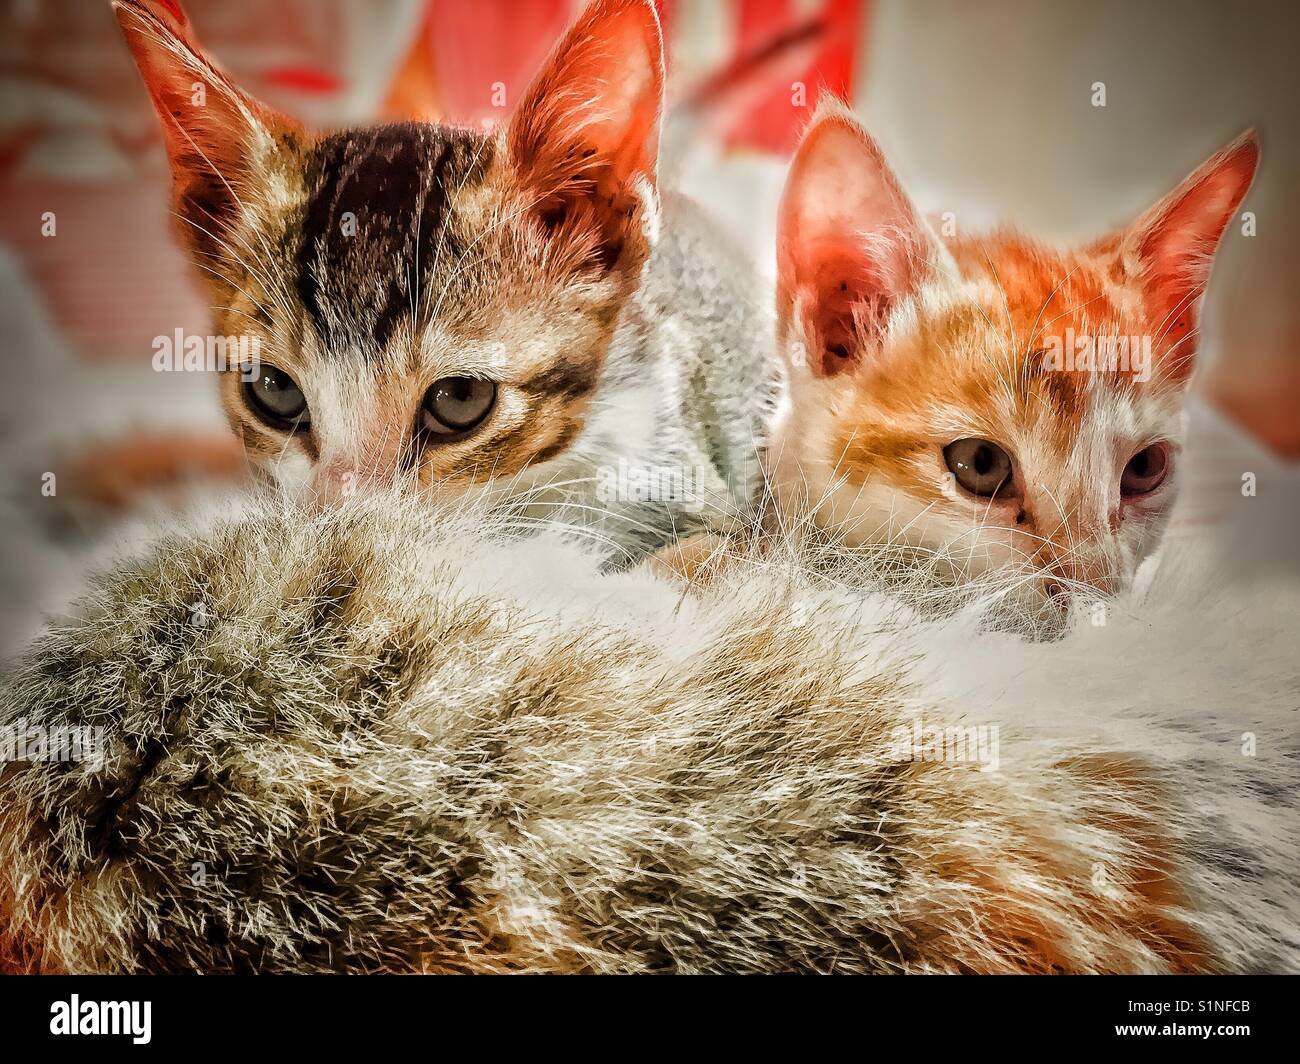 Kittens hidding behind their mother Stock Photo